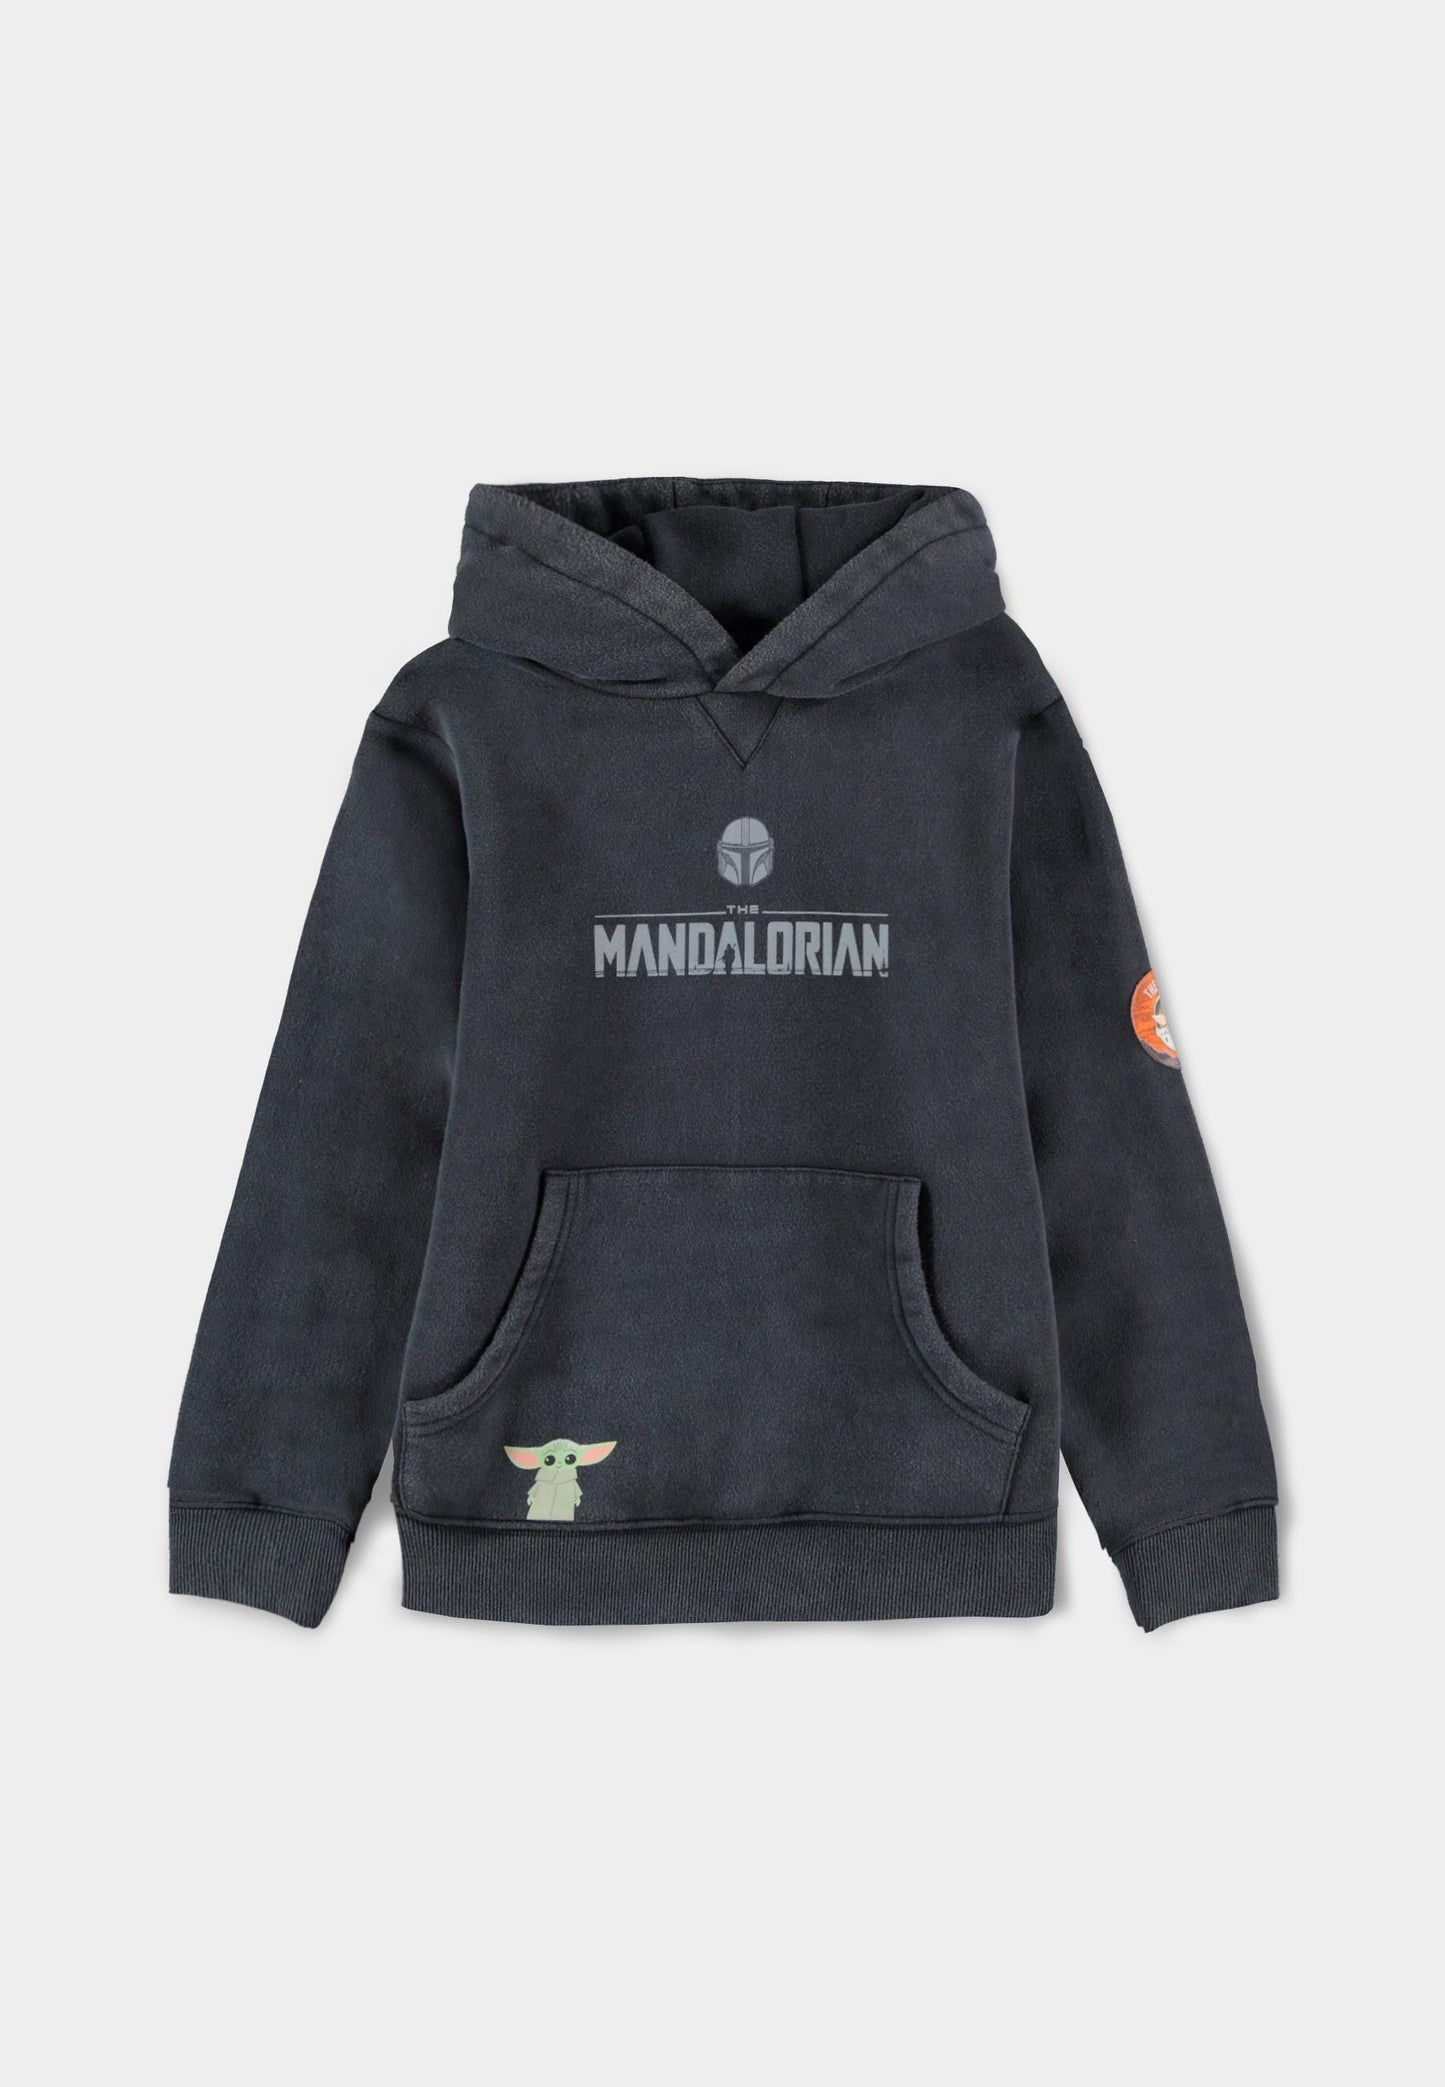 The Mandalorian - The Child Girls Patched Hoodie